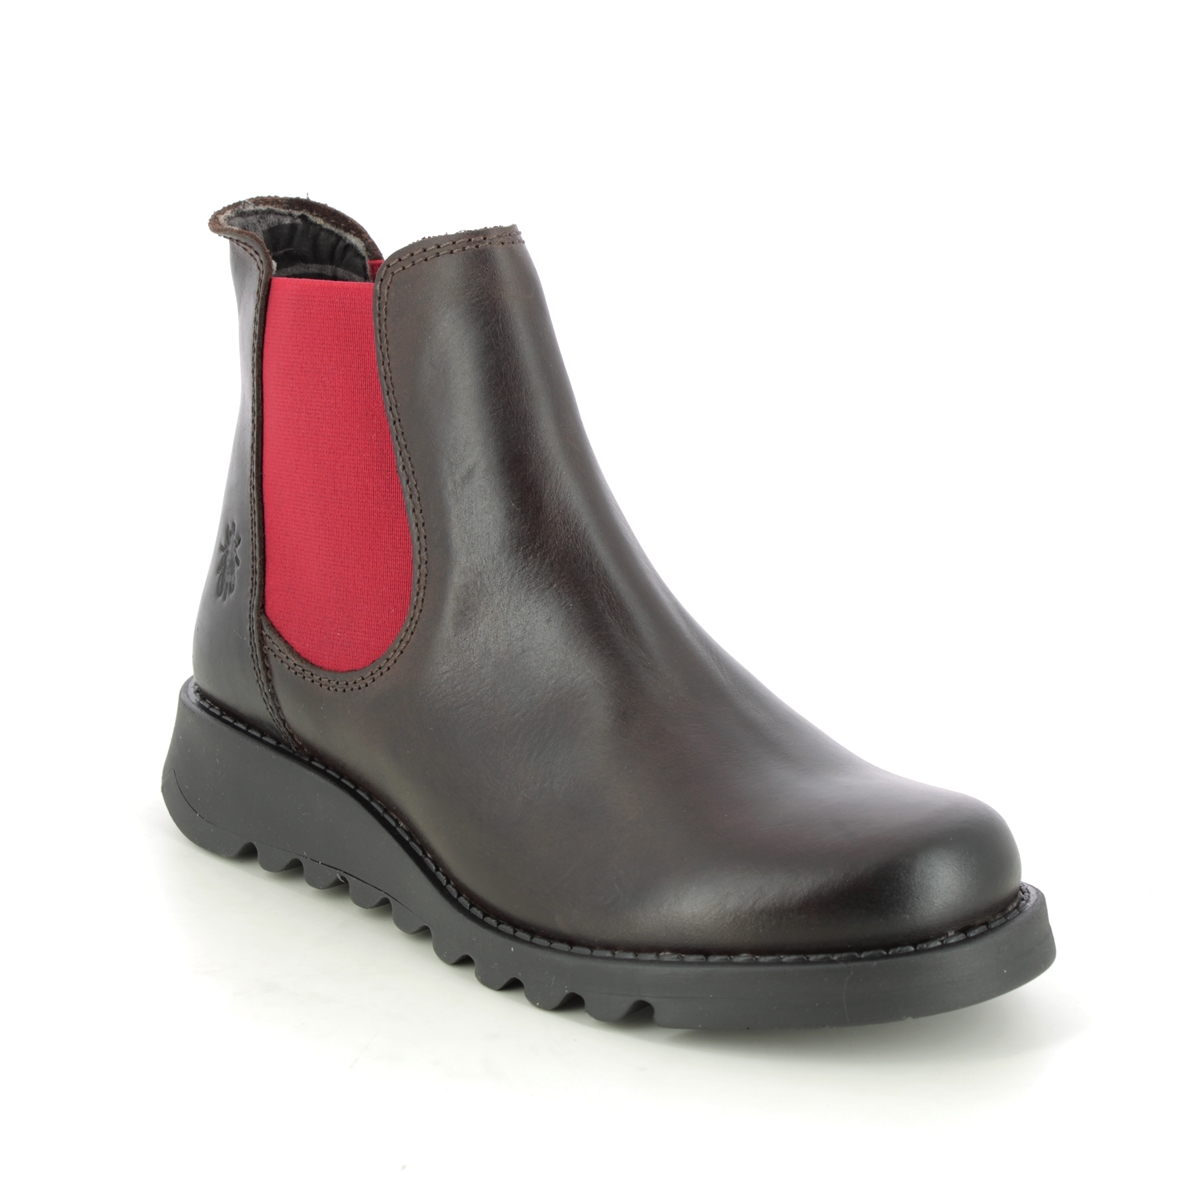 Fly London Salv Brown multi Womens Chelsea Boots P143195-060 in a Plain Leather in Size 38